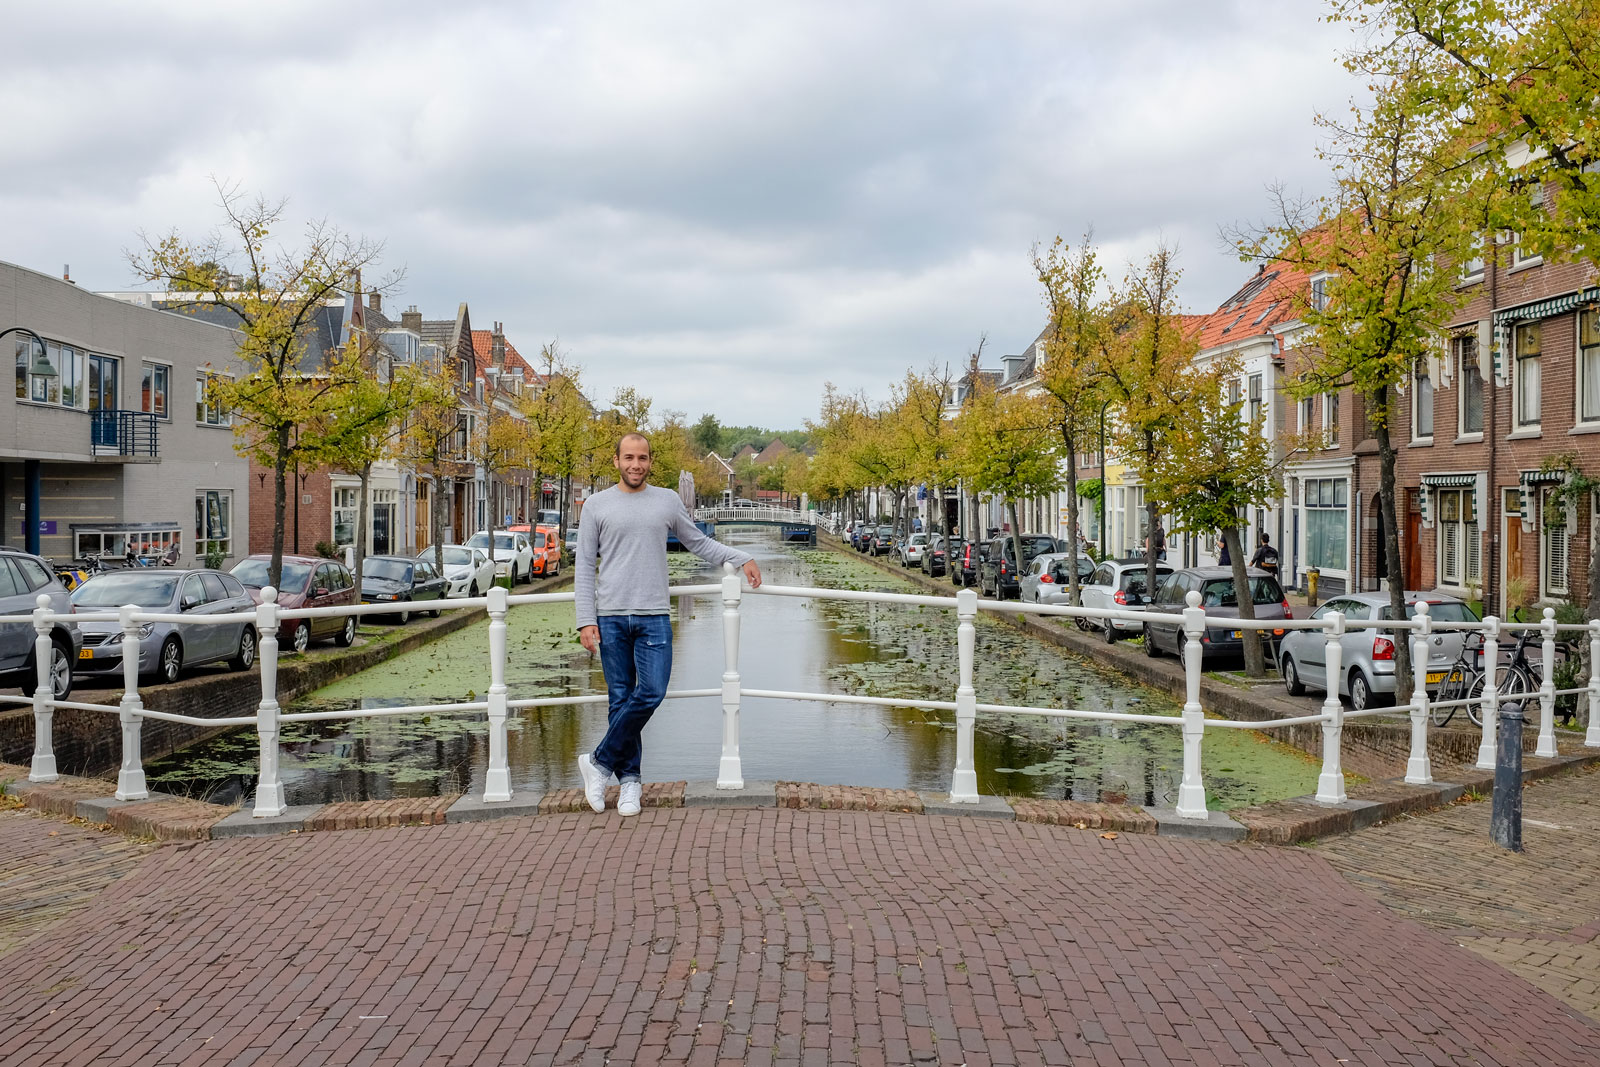 Michael poses for a photo at Delft's canal